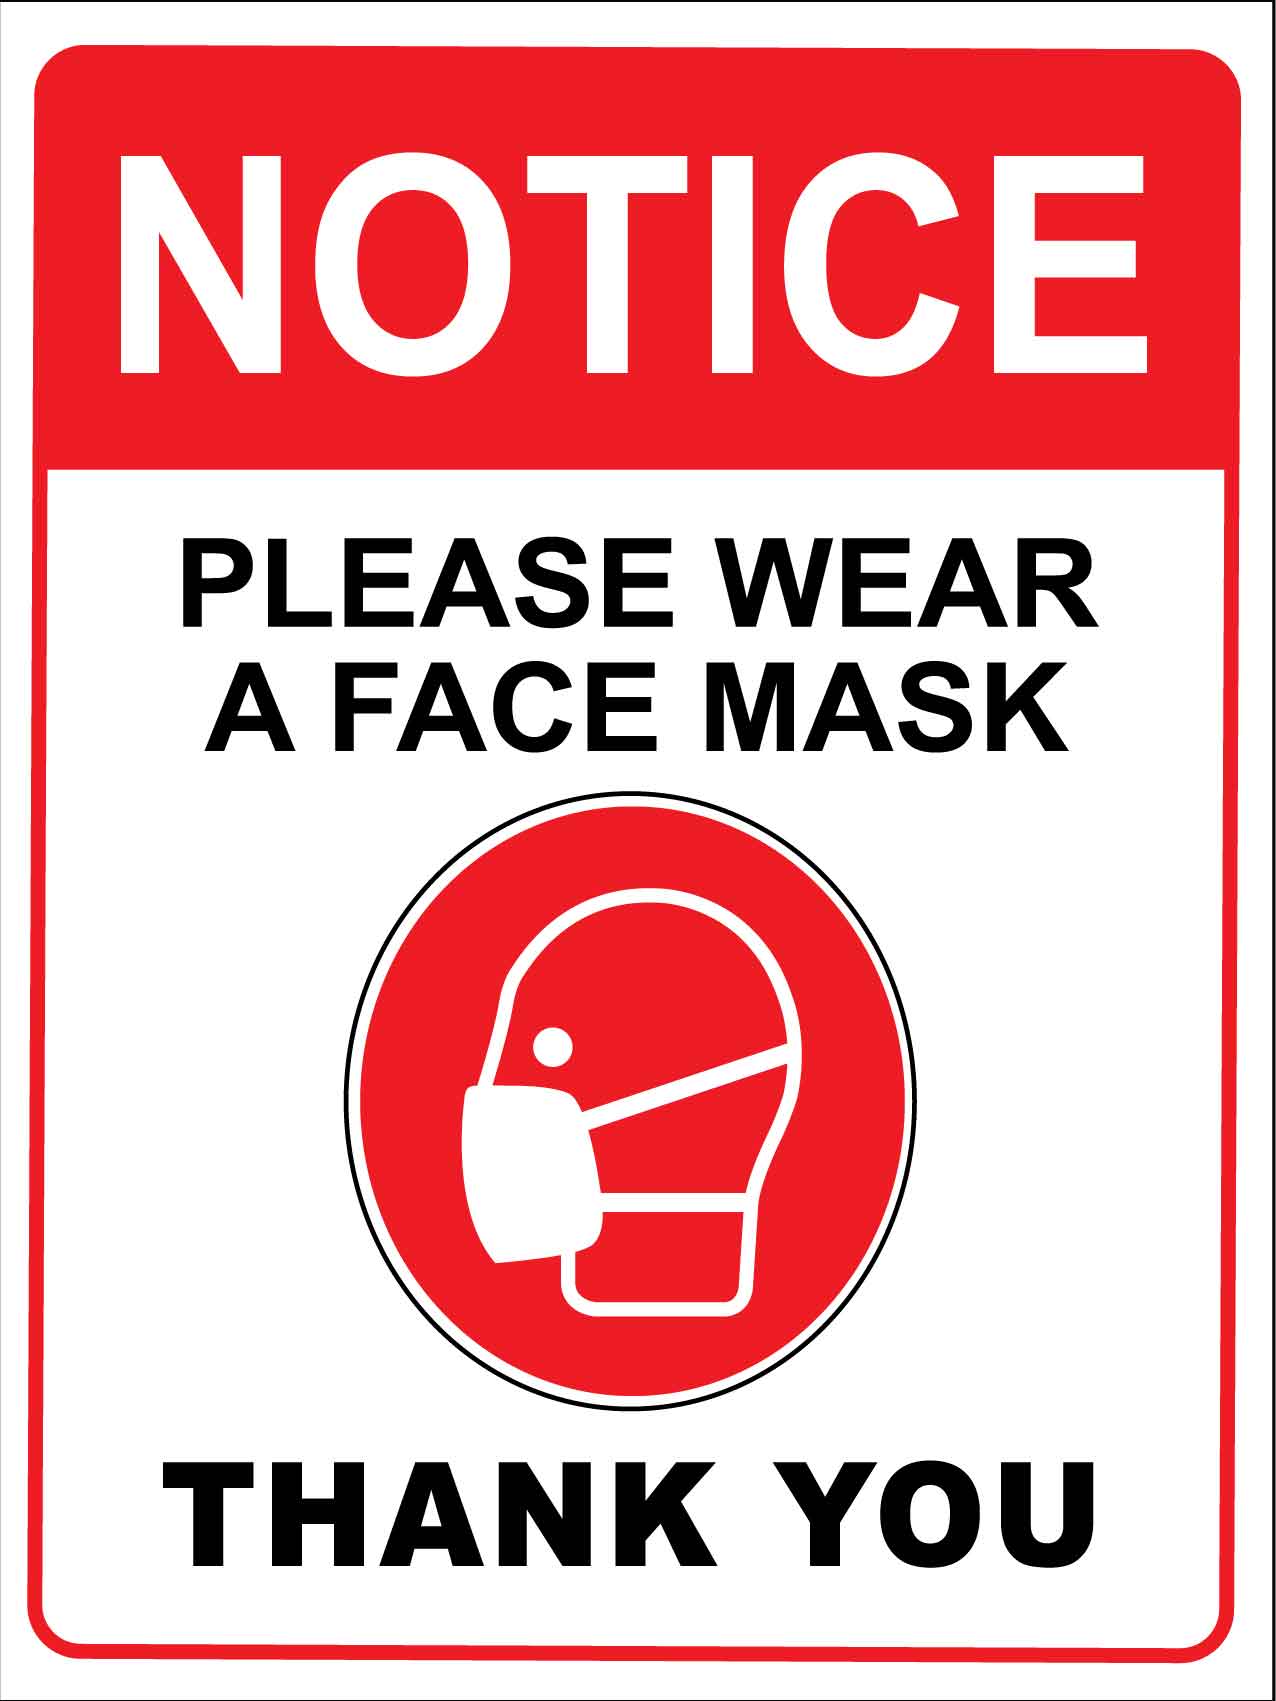 Notice Please Wear A Face Mask Thank You Sign - Red and White